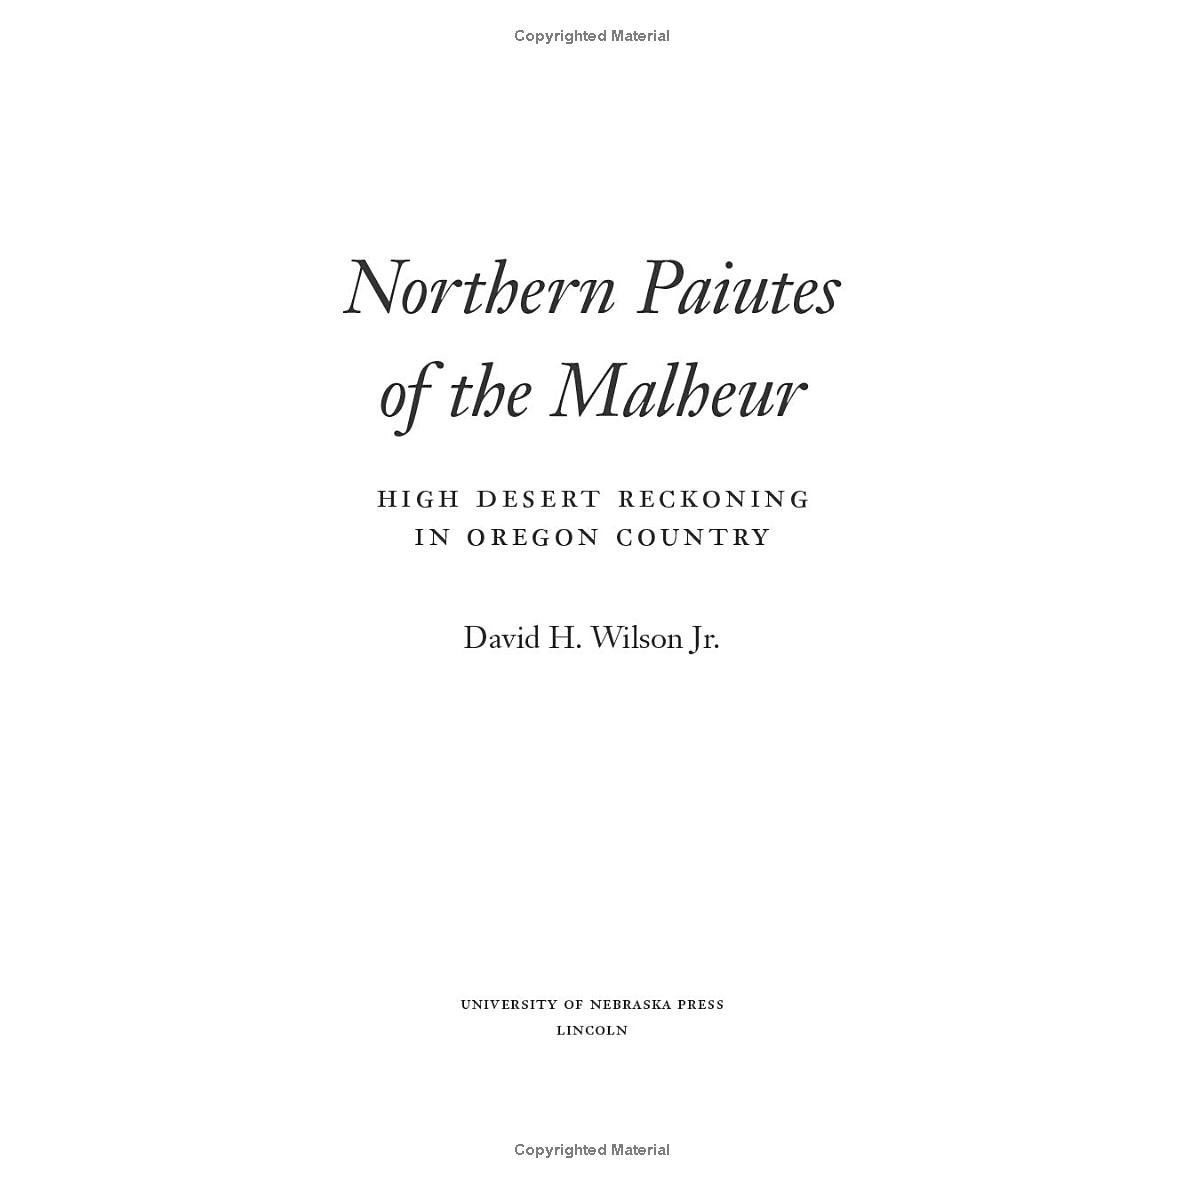 Northern Paiutes of the Malheur: High Desert Reckoning in Oregon Country by David H. Wilson Jr.